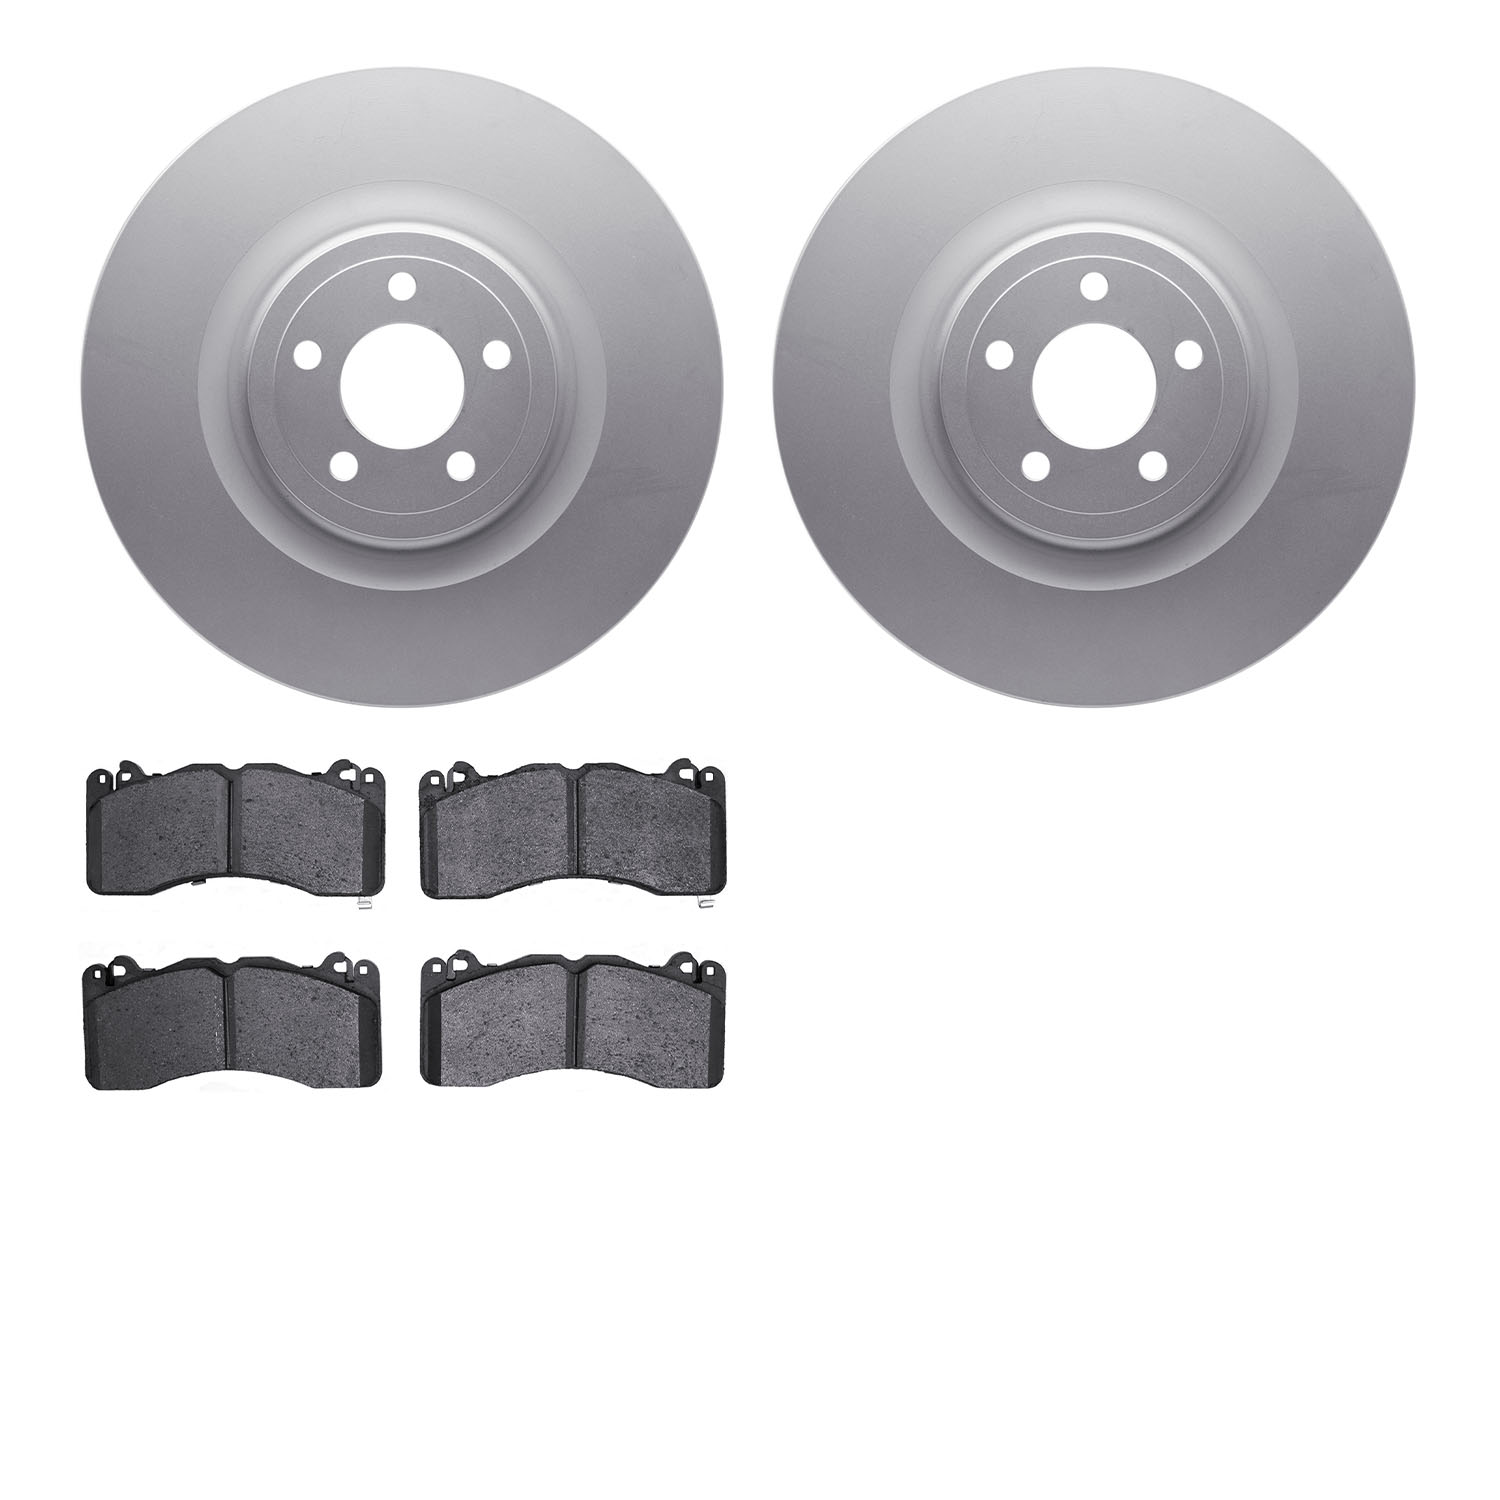 4502-99056 Geospec Brake Rotors w/5000 Advanced Brake Pads Kit, Fits Select Ford/Lincoln/Mercury/Mazda, Position: Front